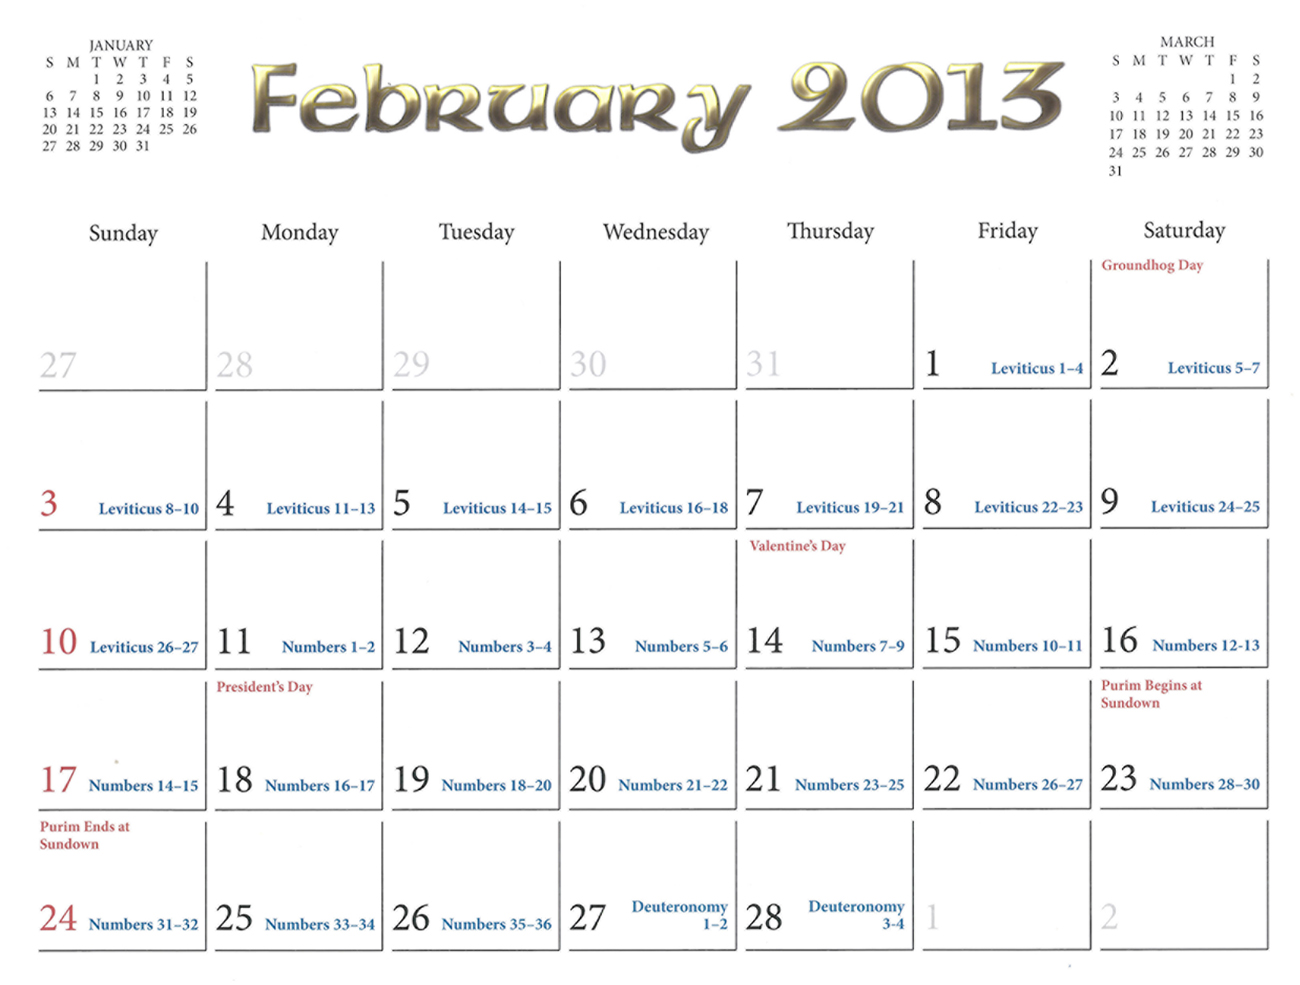 2013 Prophecy Calendar: February - The Ancestral Lieage of the Messiah